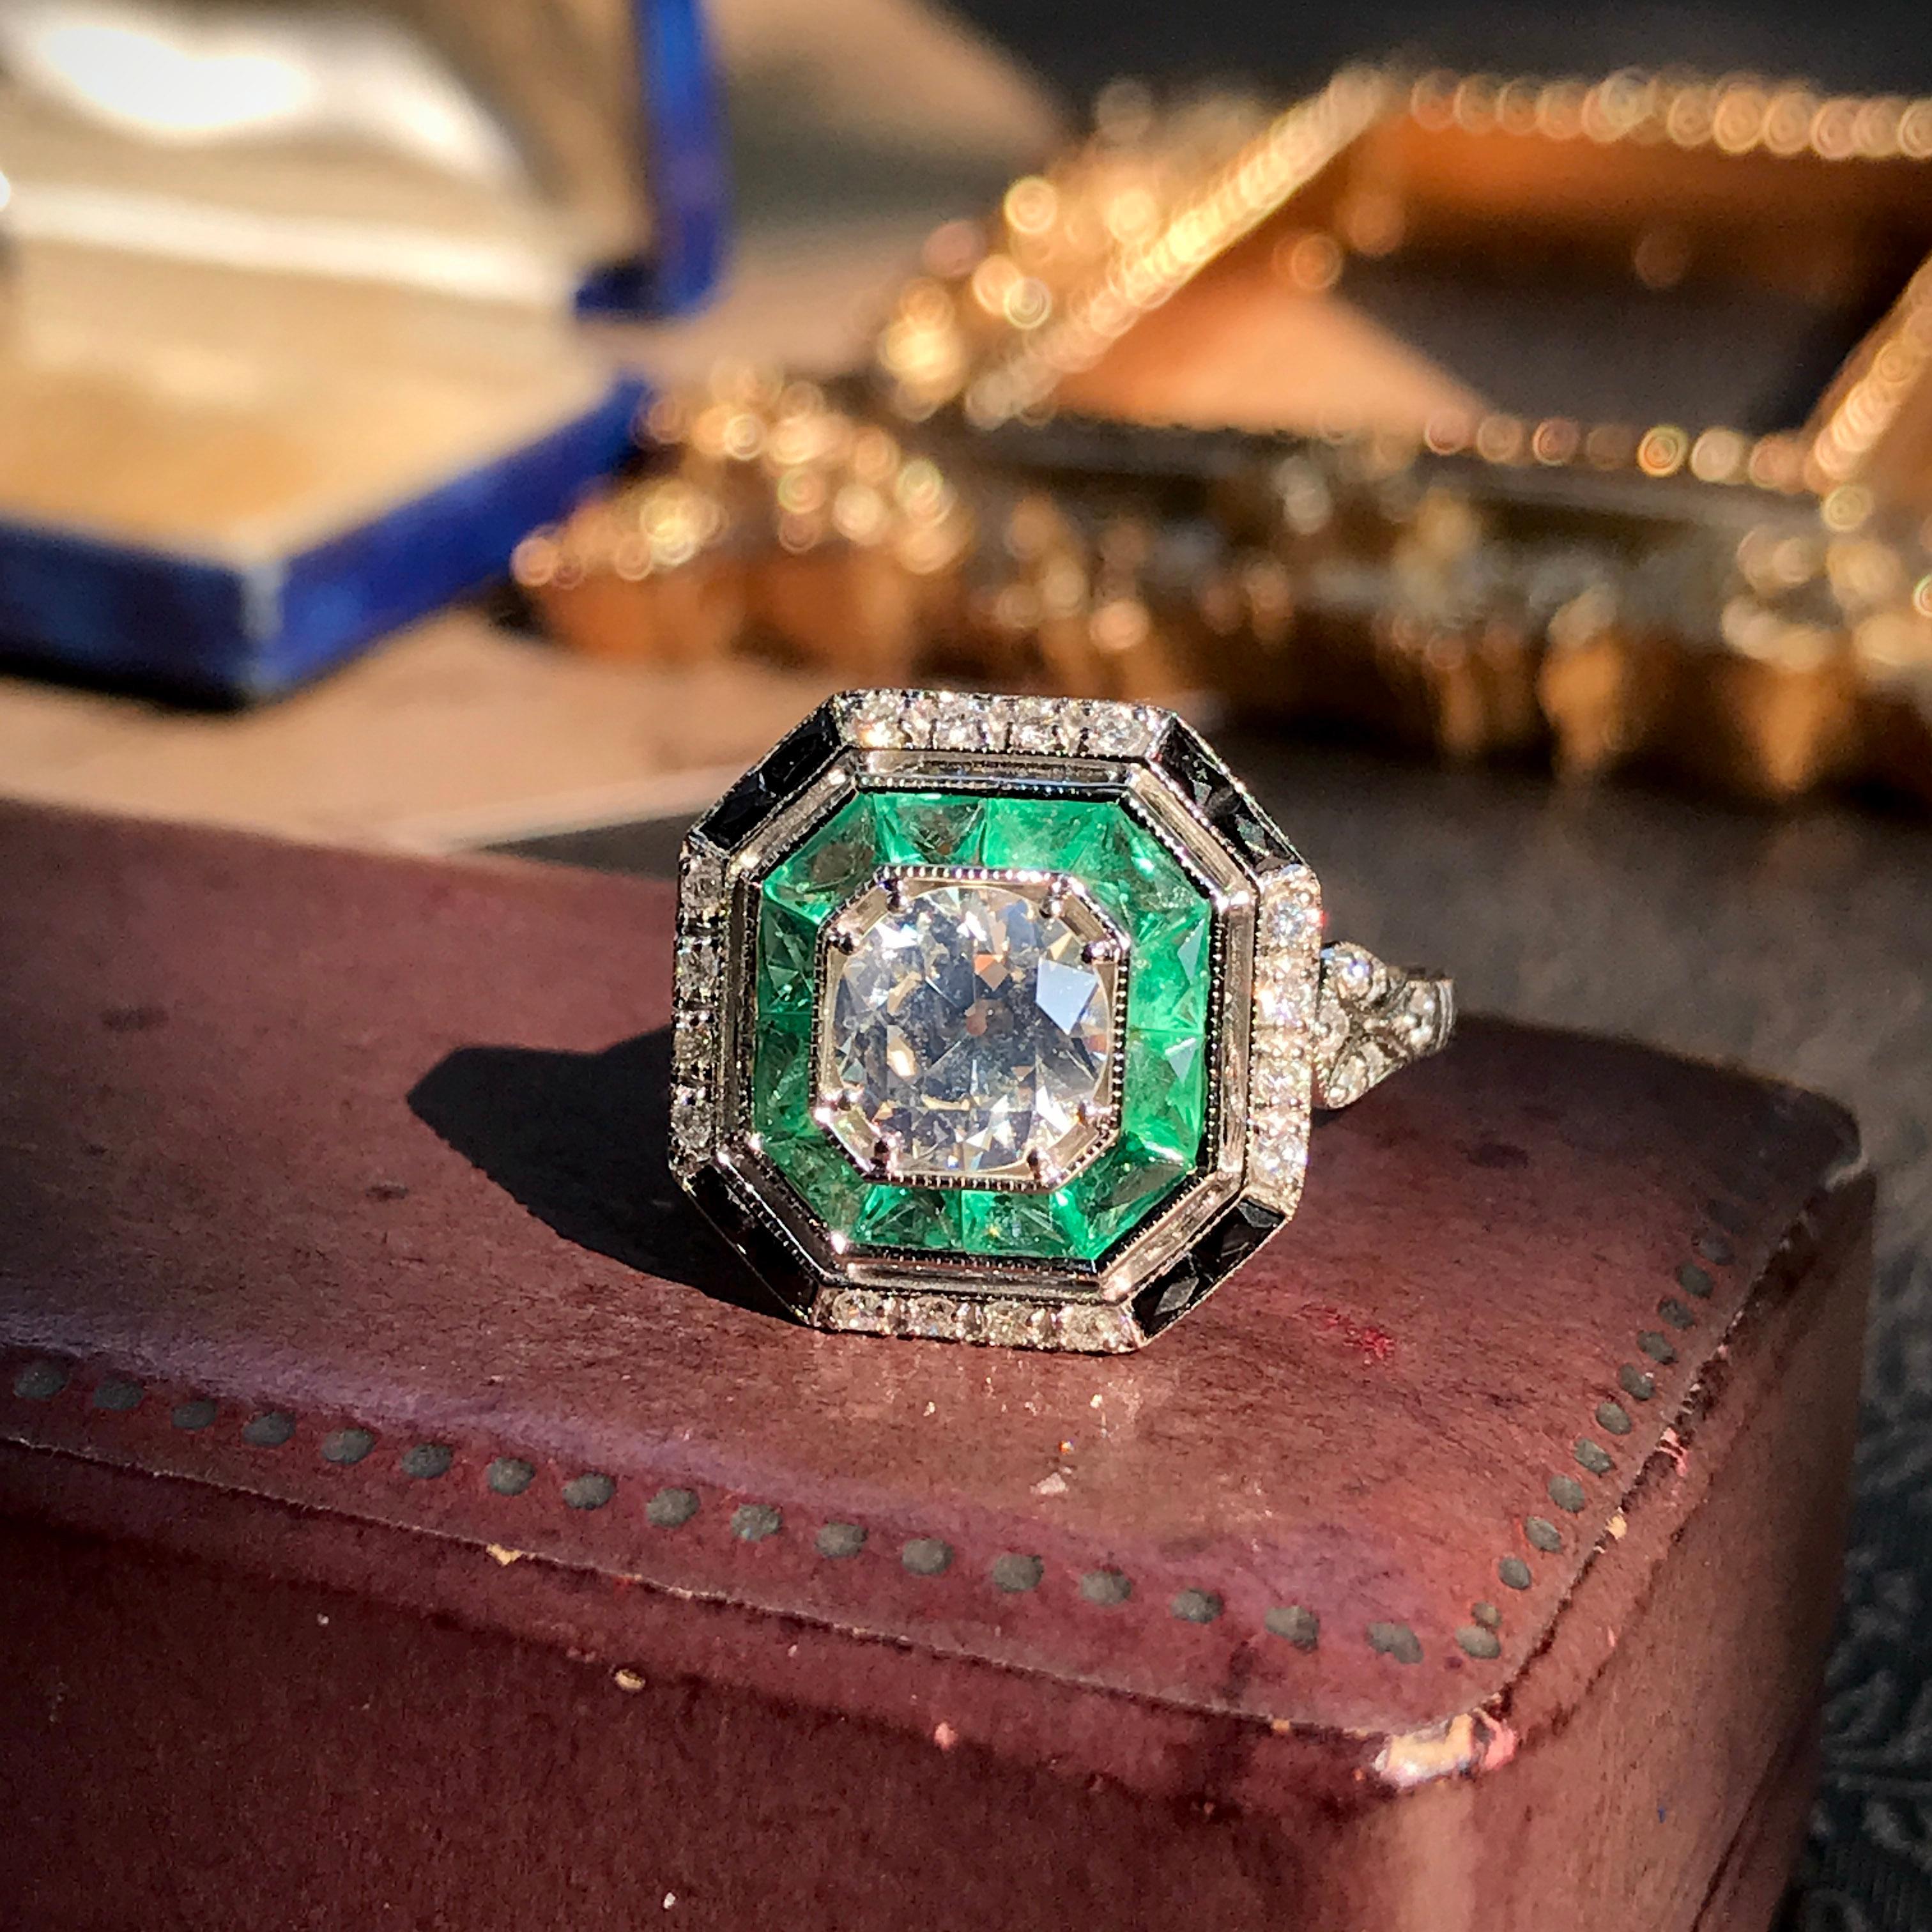 An 18k white gold Art-Deco design diamond emerald and onyx target ring, center diamond with an outer ring of round diamonds an inner one of French cut emeralds and onyx and finished with millgrain edging, finished with diamond shoulders.

Ring